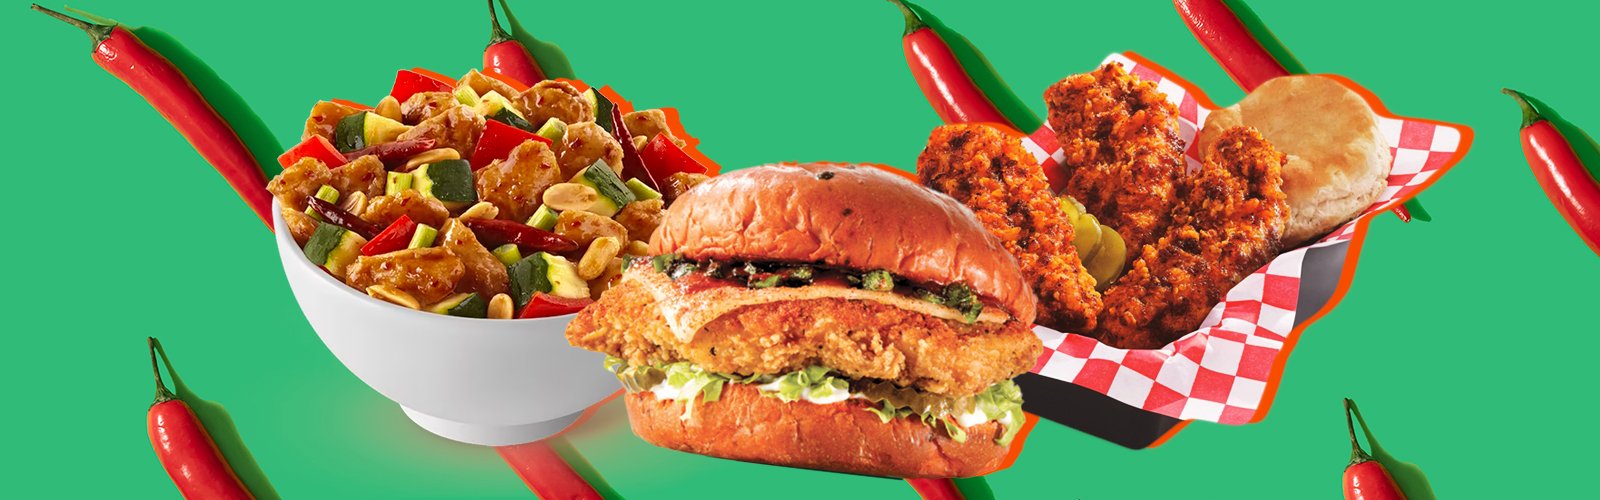 The Best Spicy Dishes In Fast Food, Ranked On Heat & Flavor